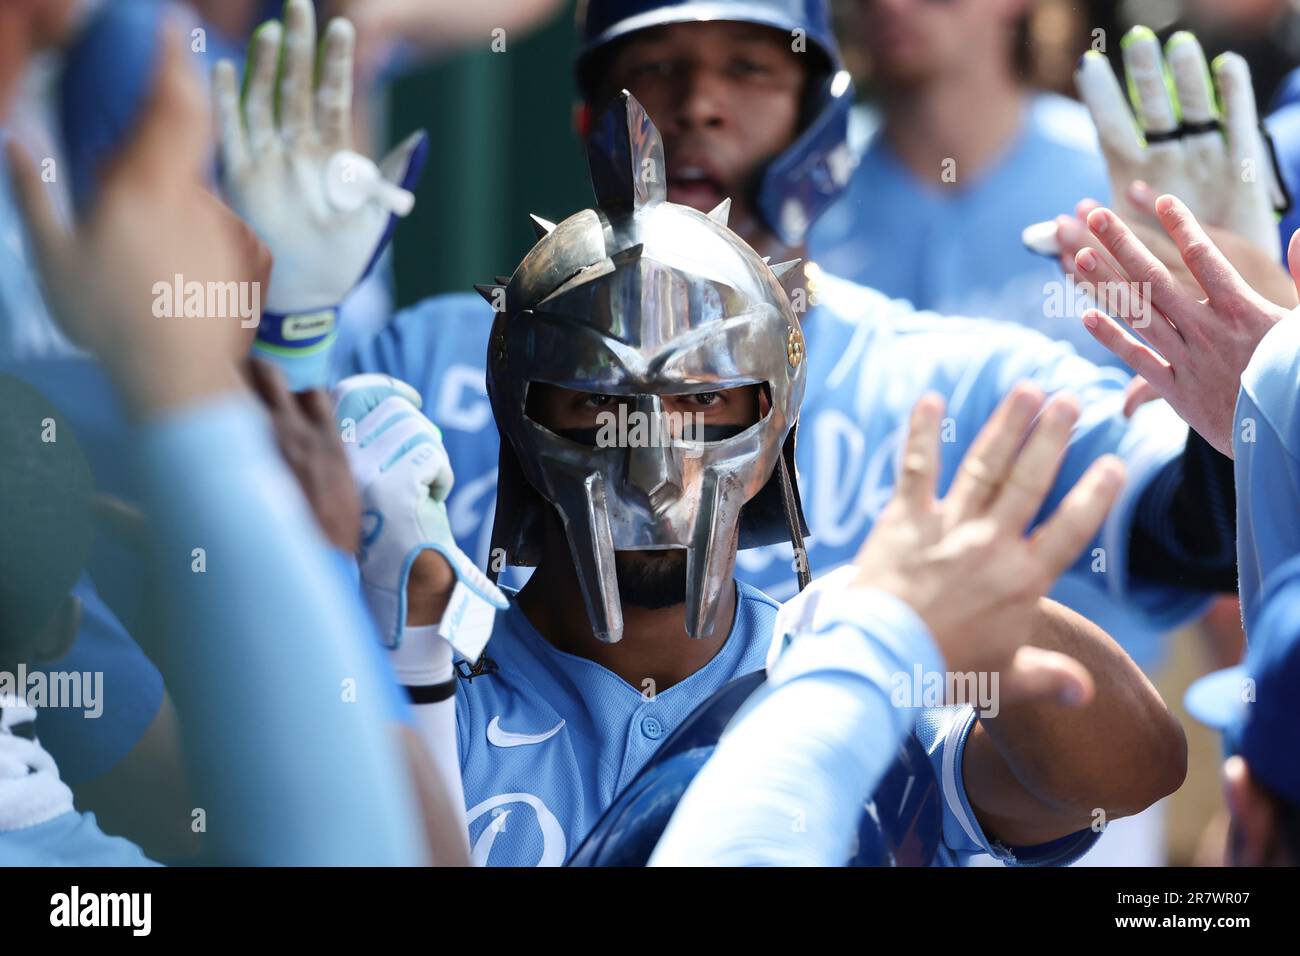 KANSAS CITY, MO - JUNE 17: Kansas City Royals right fielder MJ Melendez (1)  celebrates a 2-run home run in the fourth inning wearing a gladiator helmet  in the dugout of an